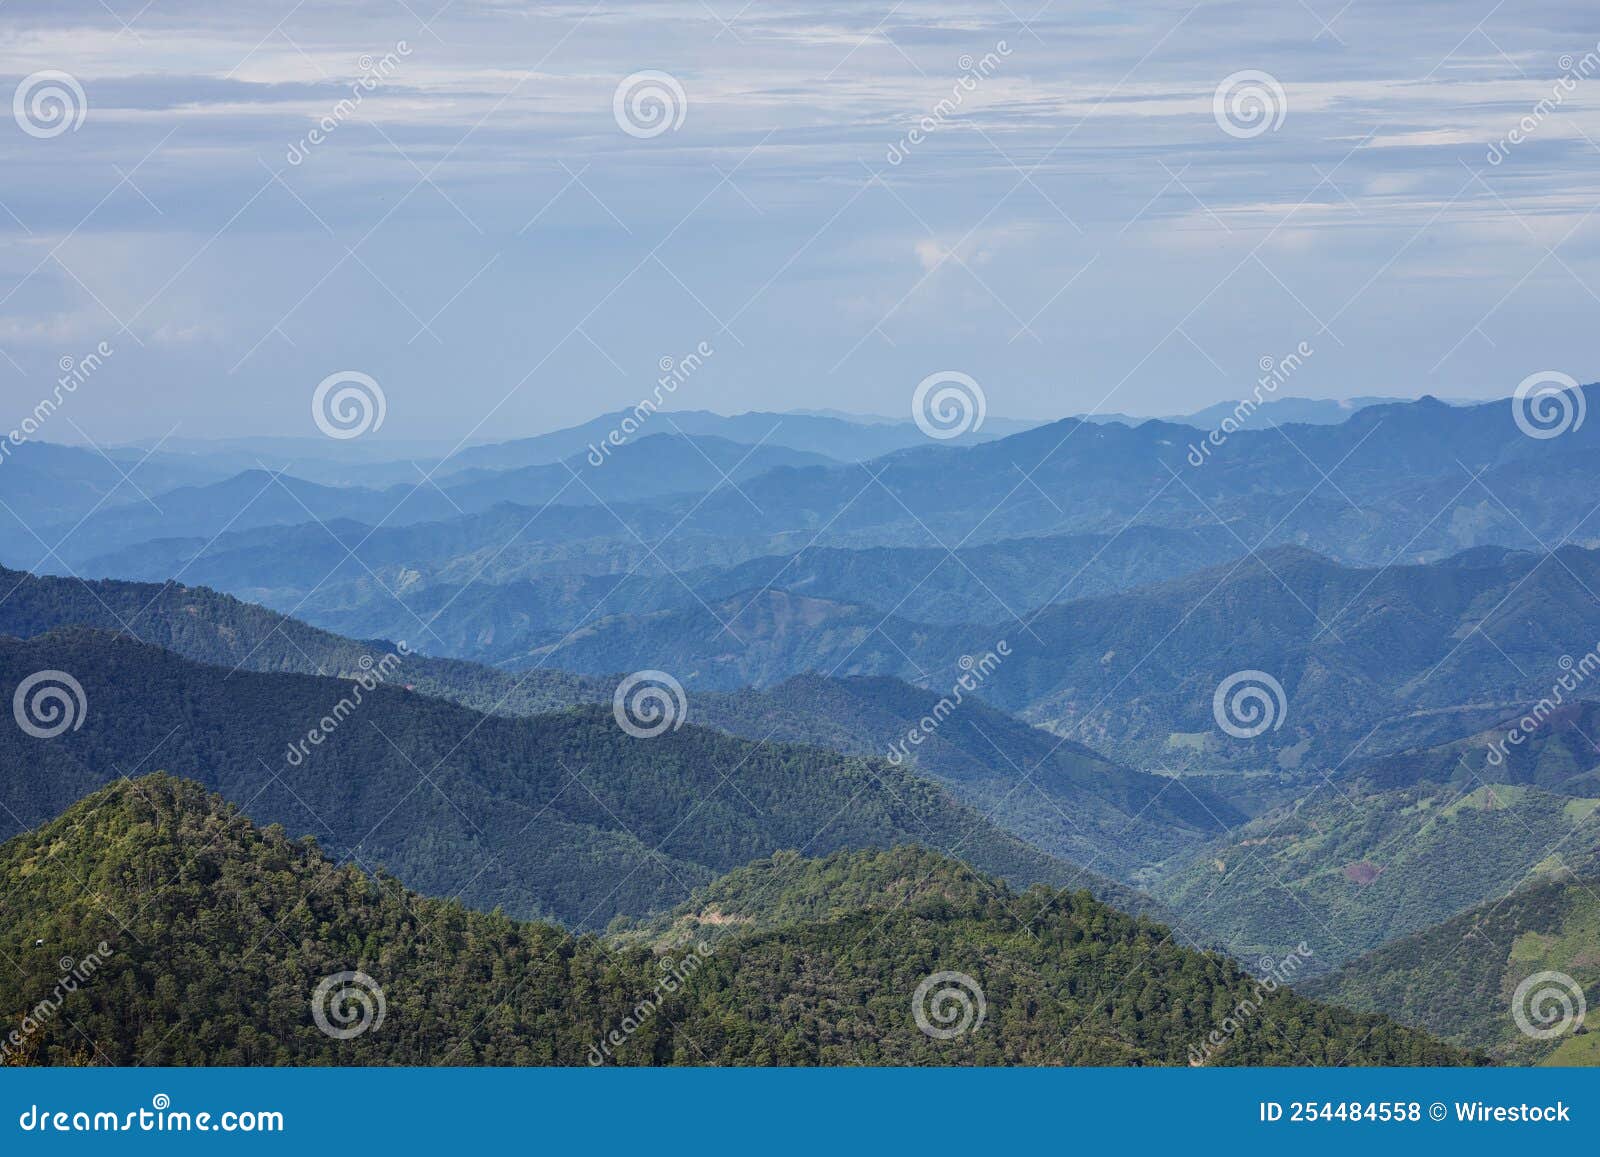 aerial view over the forests on the mountains of san jose del pacifico